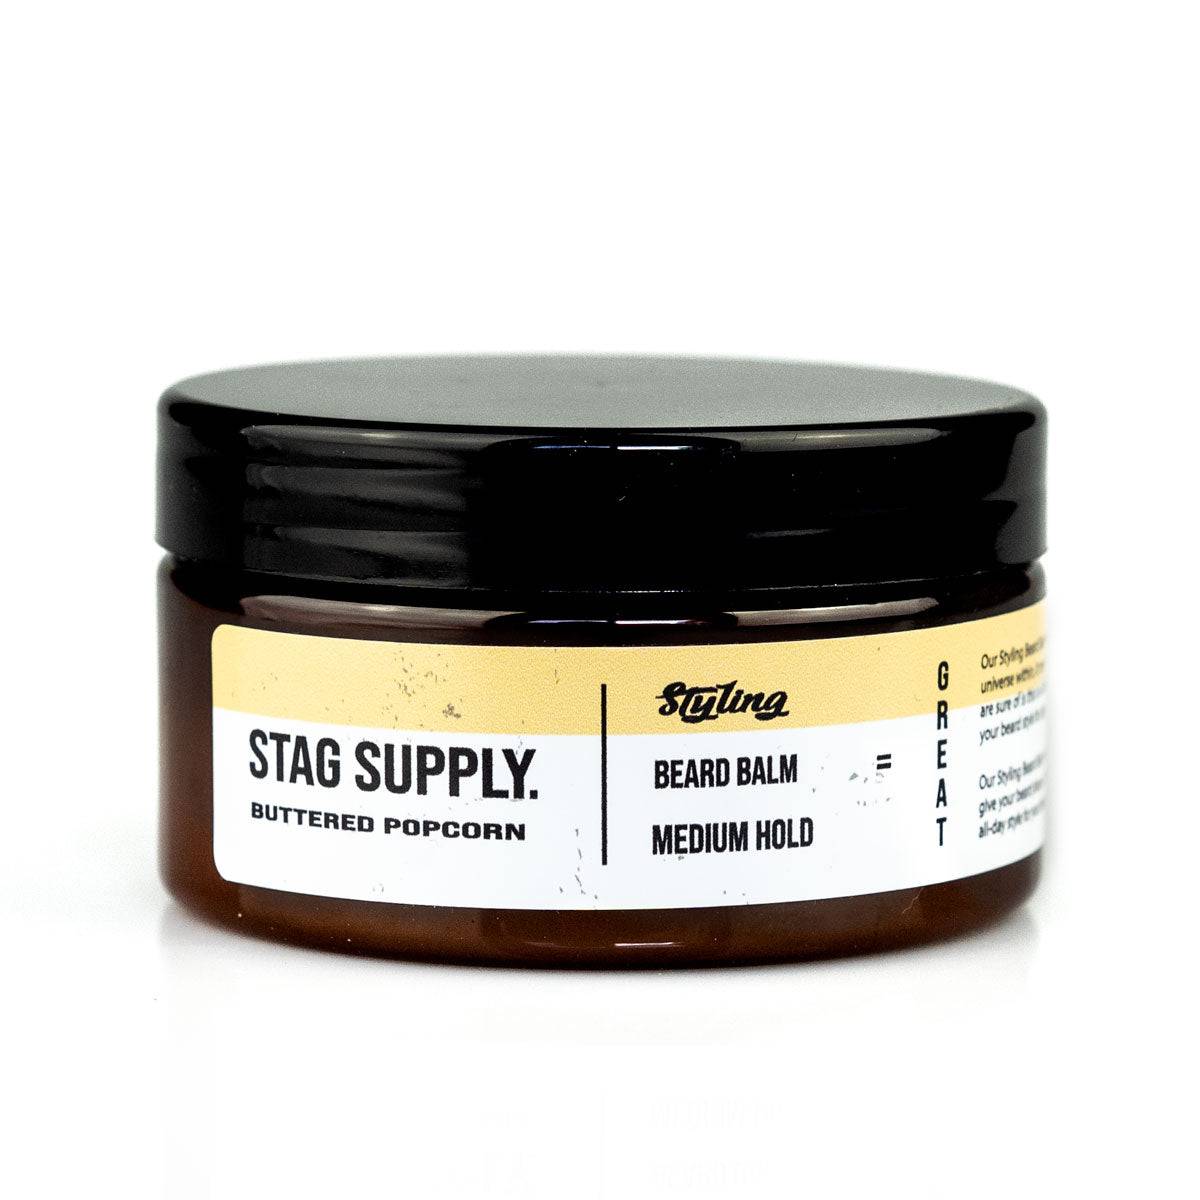 Stag Supply Buttered Popcorn Styling Beard Balm 100ml